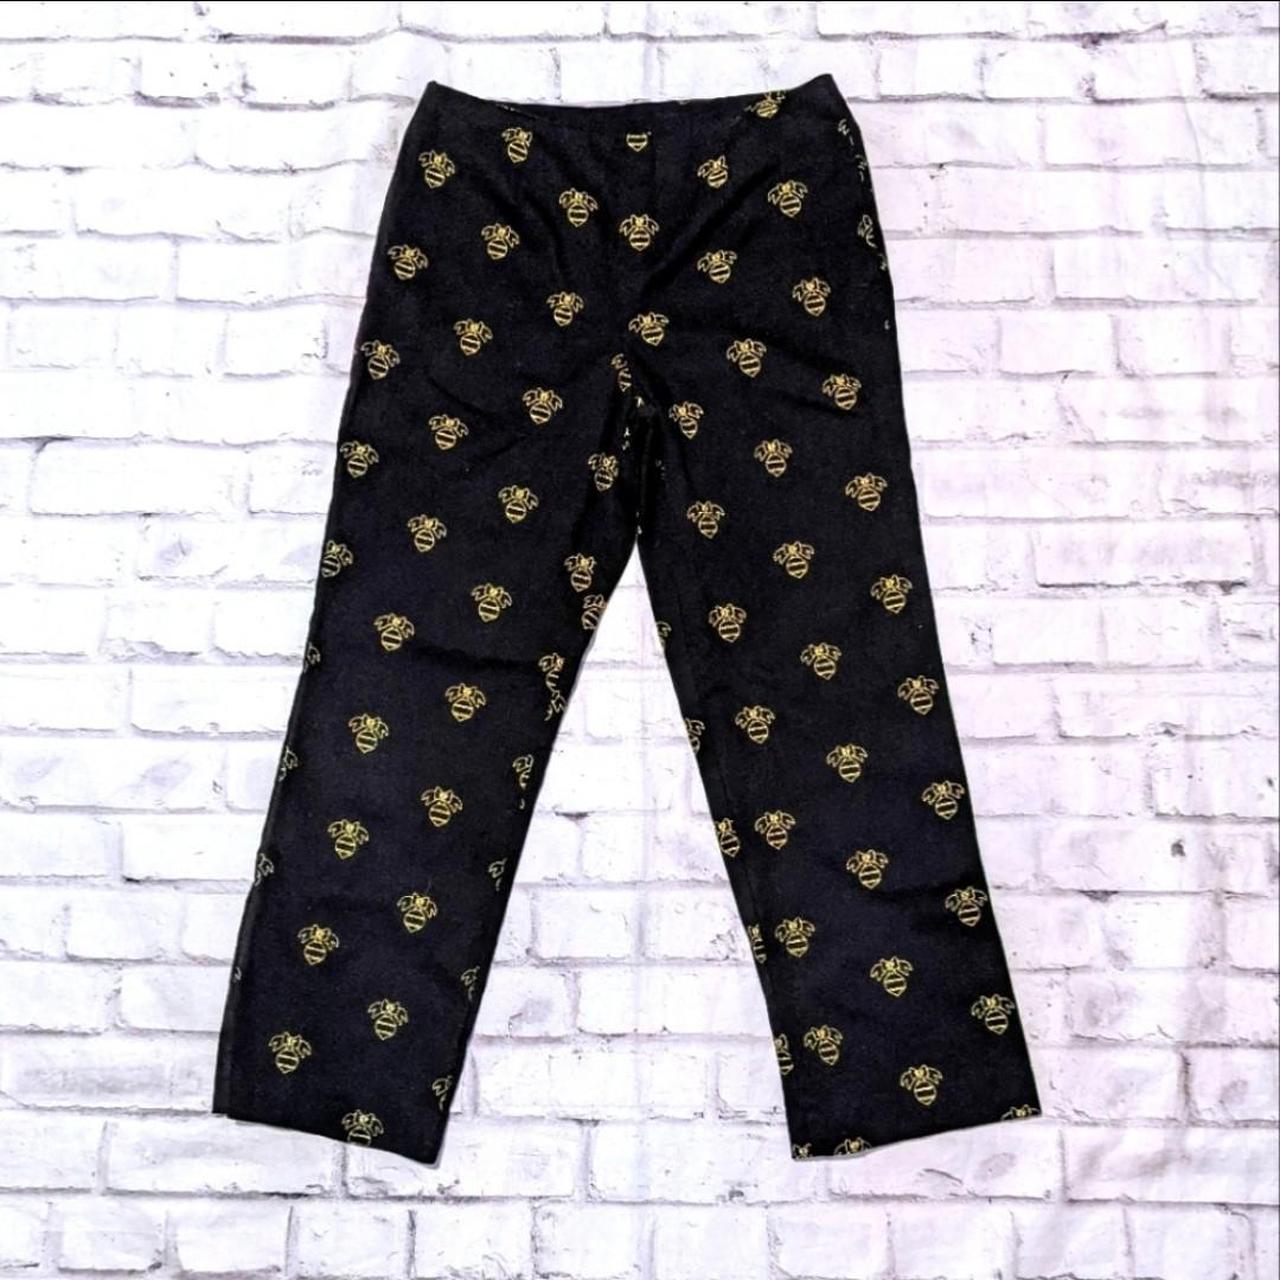 Women's Black and Gold Trousers